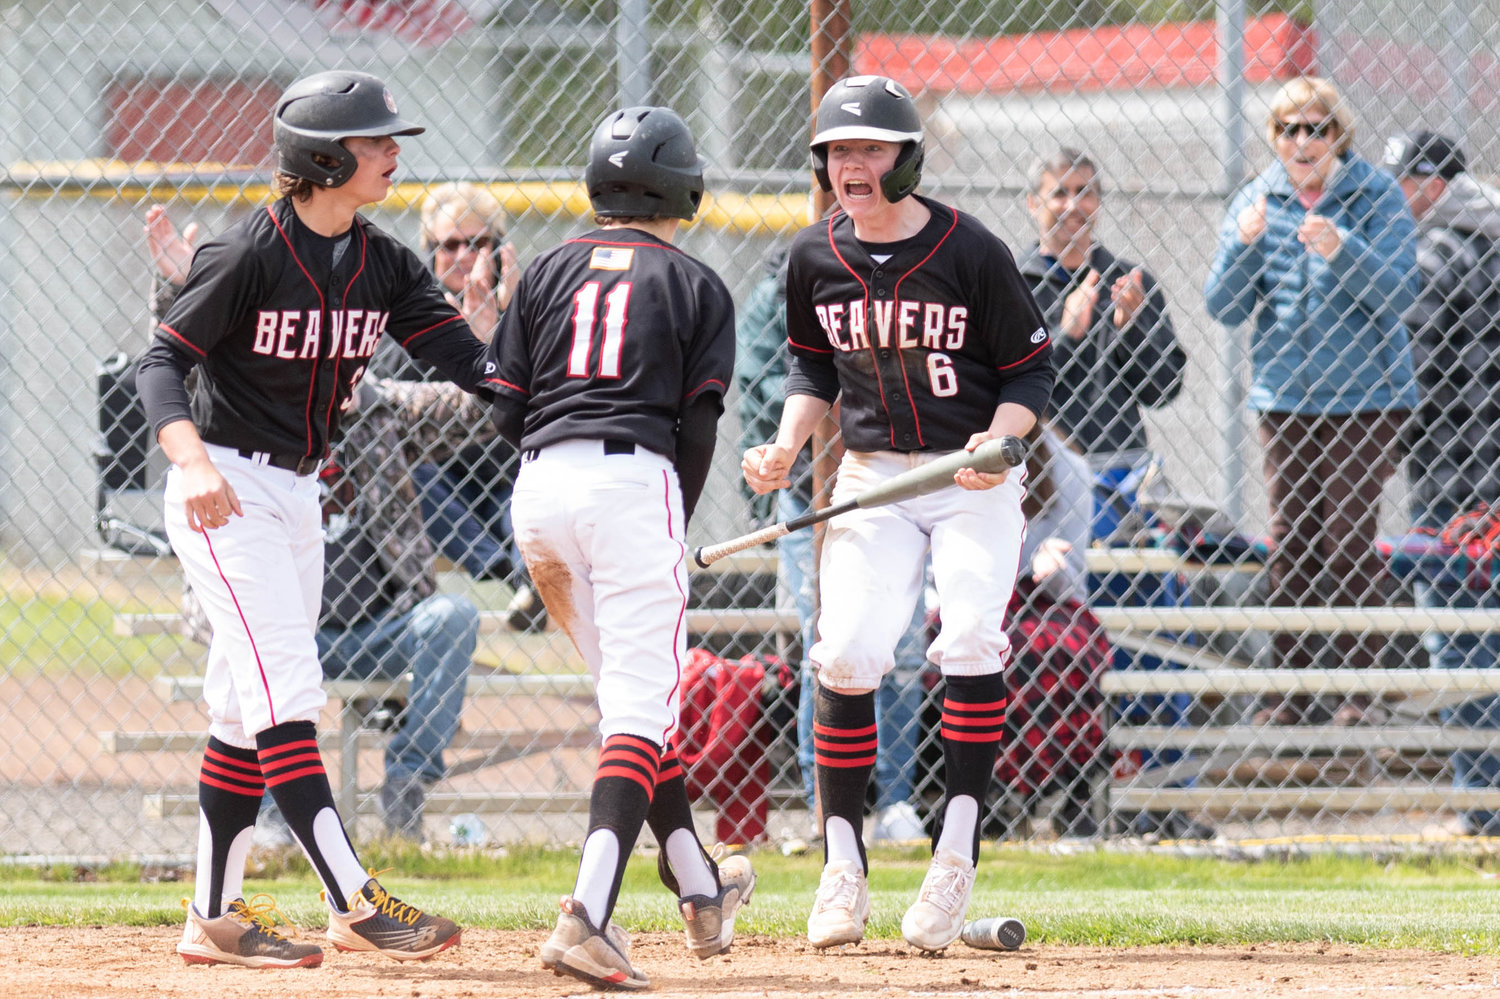 Tenino's Mikey Vassar (6) yells in celebration during the Beavers' 8-6, loser-out victory over Eatonville in the 1A District IV playoffs Friday in Castle Rock.